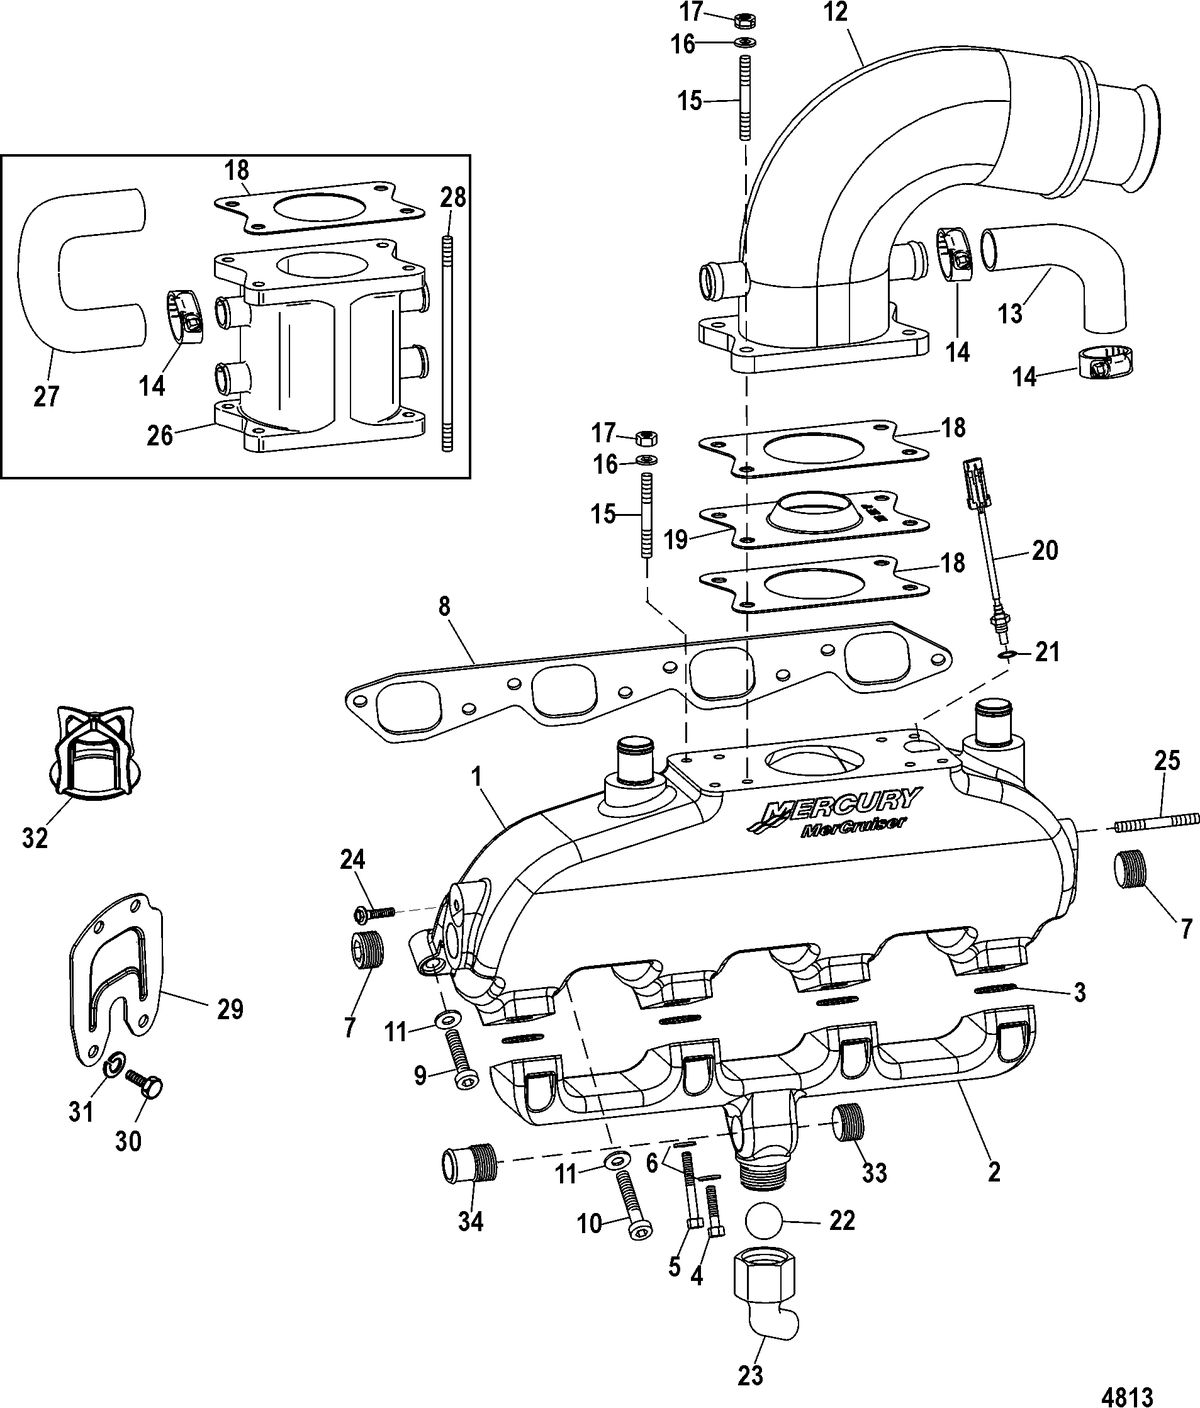 MERCRUISER 496 MAG. STERNDRIVE EXHAUST MANIFOLD(W/ WATER RAIL), ELBOW, AND RISER